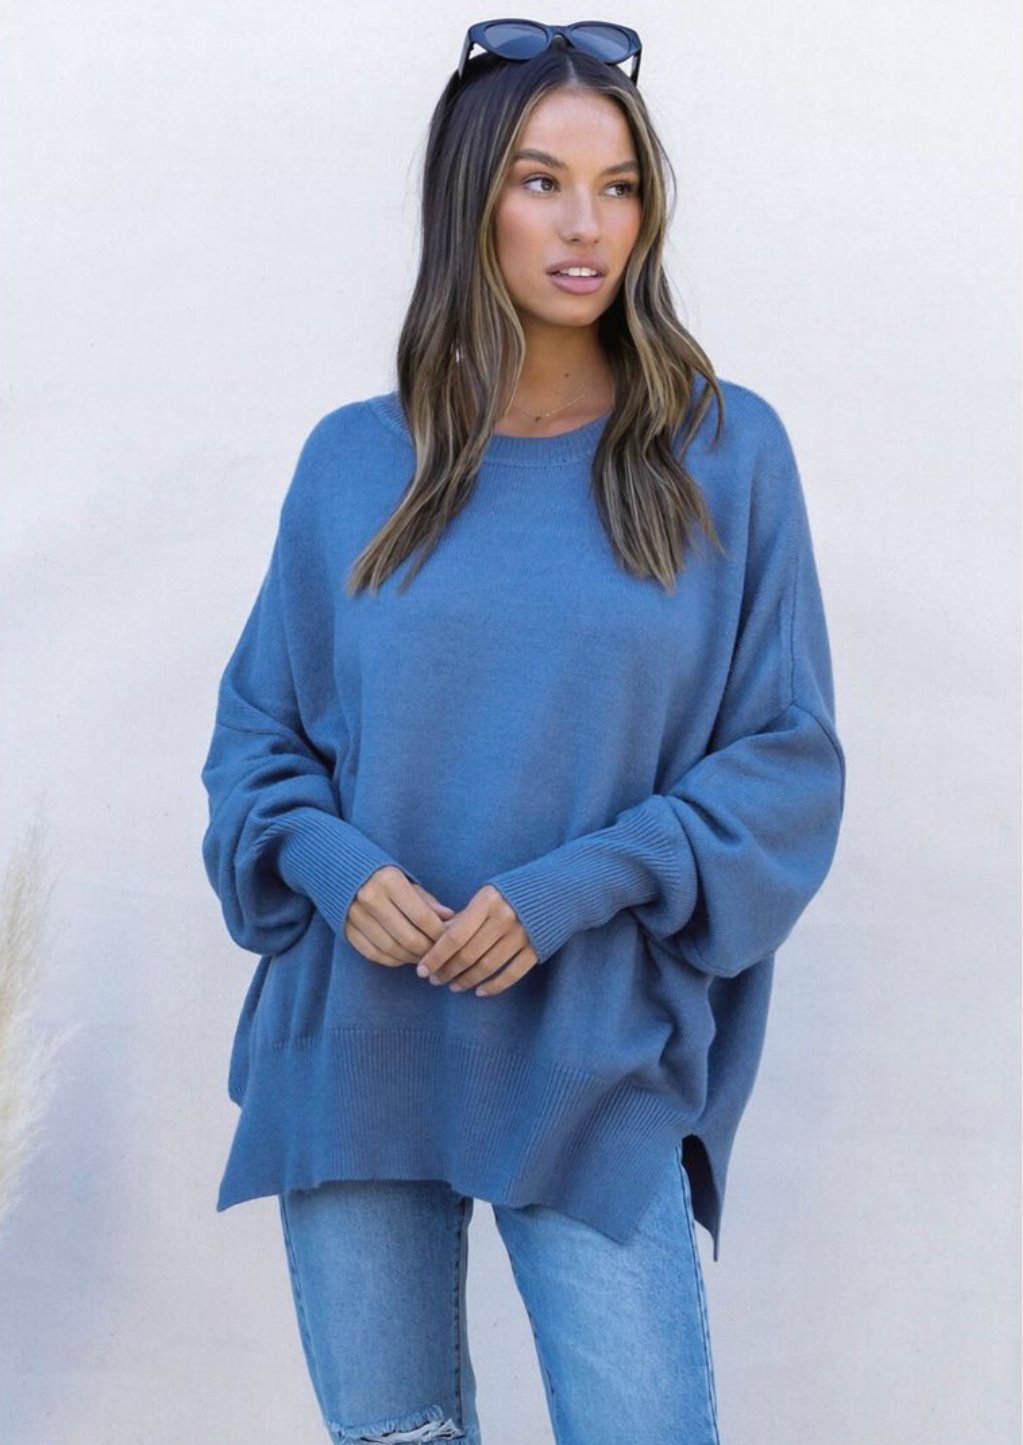 Aspen Slouchy Knit - Denim, by Love Lily  Details:  Super soft and stretchy  Lightweight knit  Slouchy fit